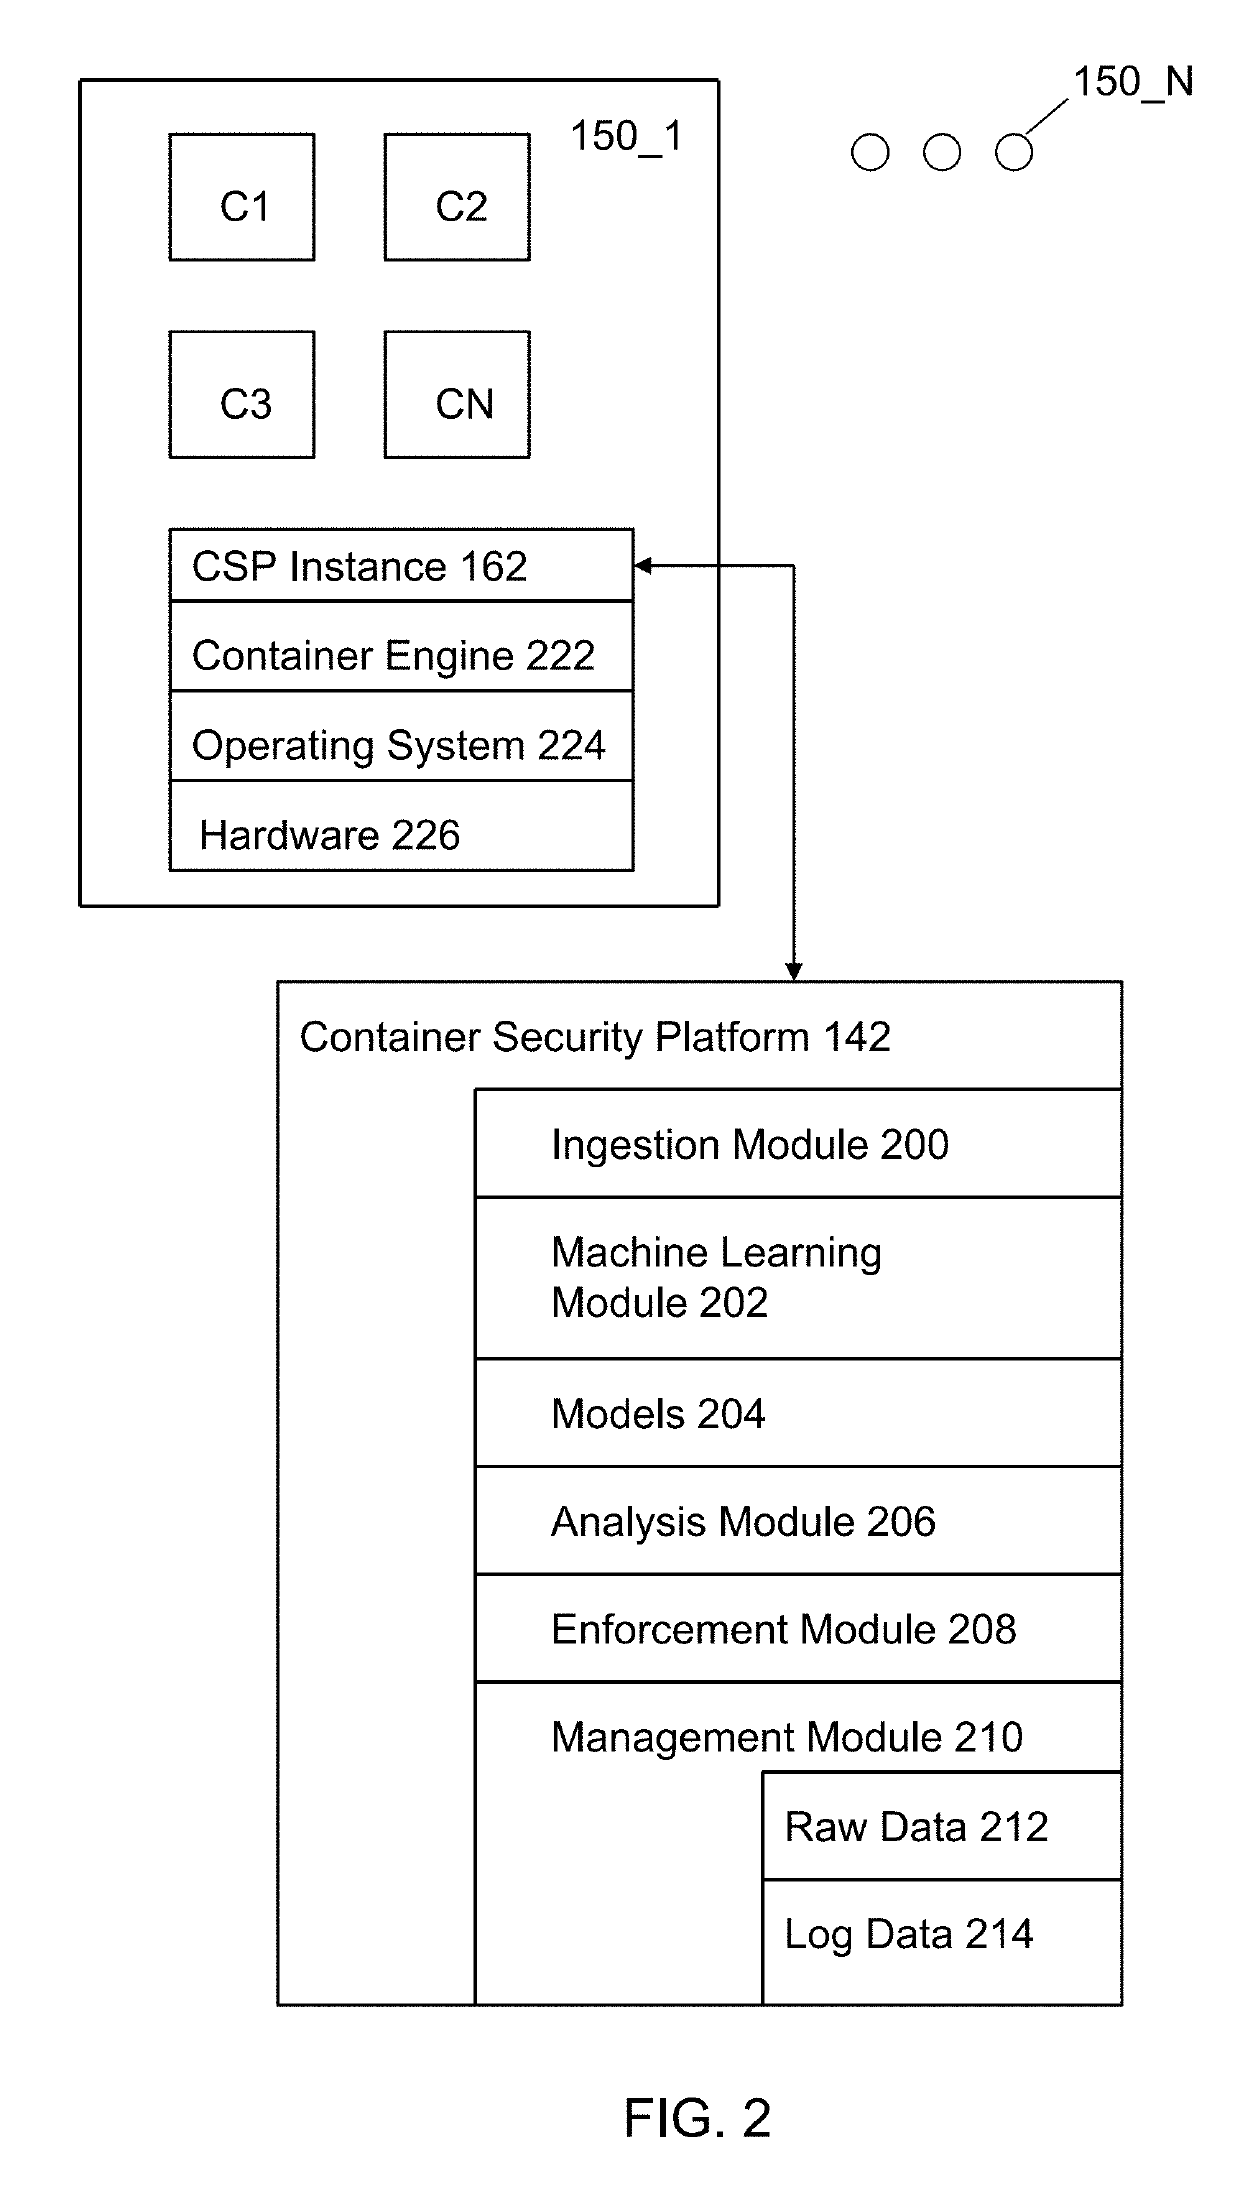 System and method for providing security in a distributed computation system utilizing containers